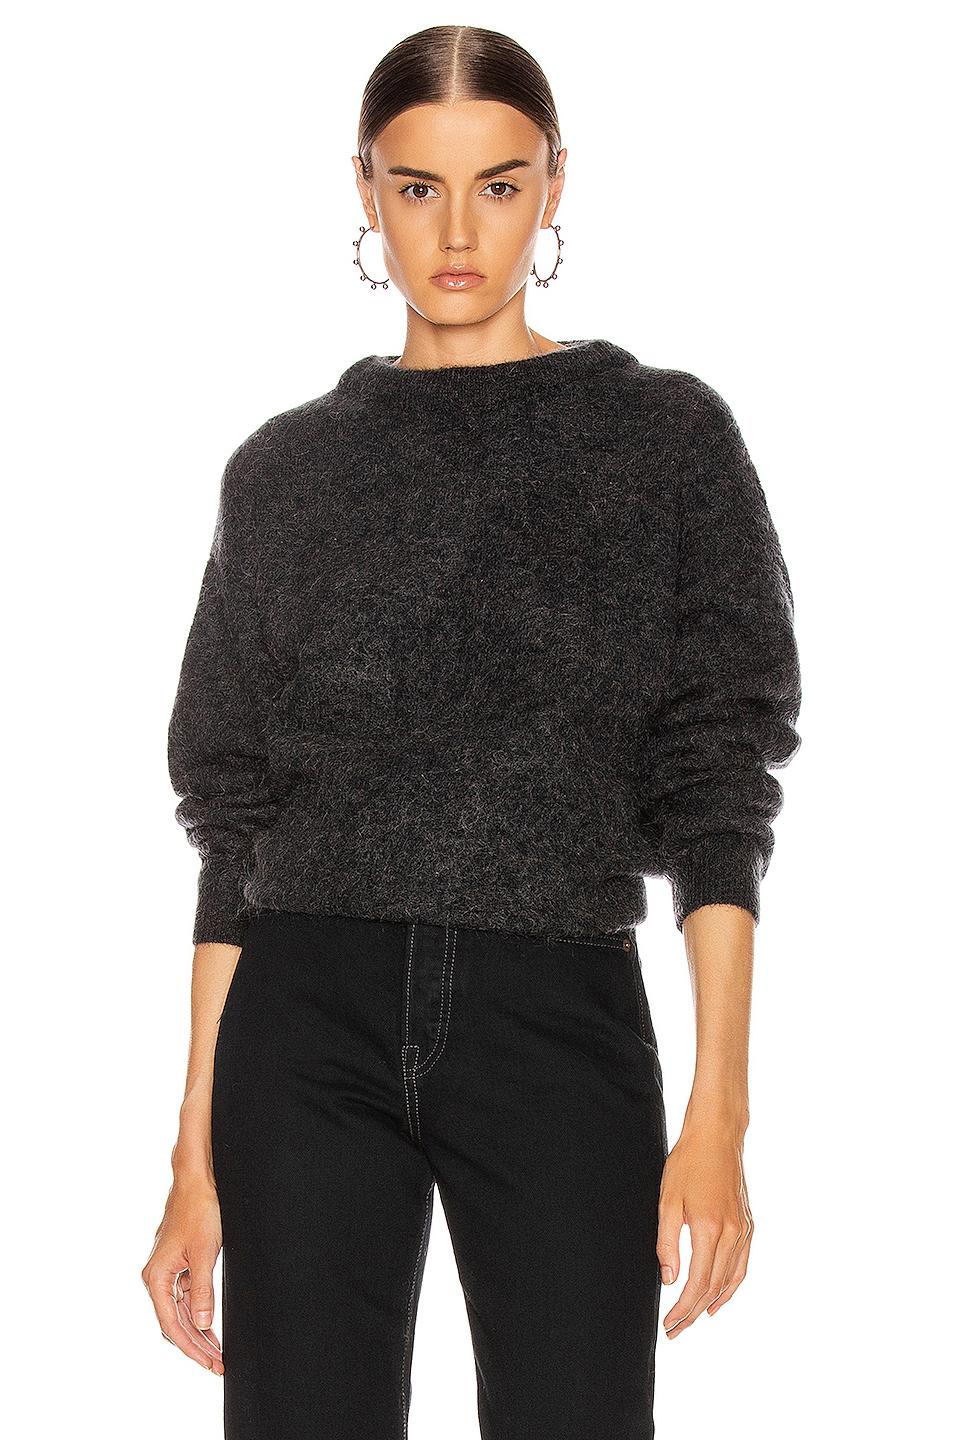 Acne Studios Synthetic Dramatic Mohair Sweater - Lyst